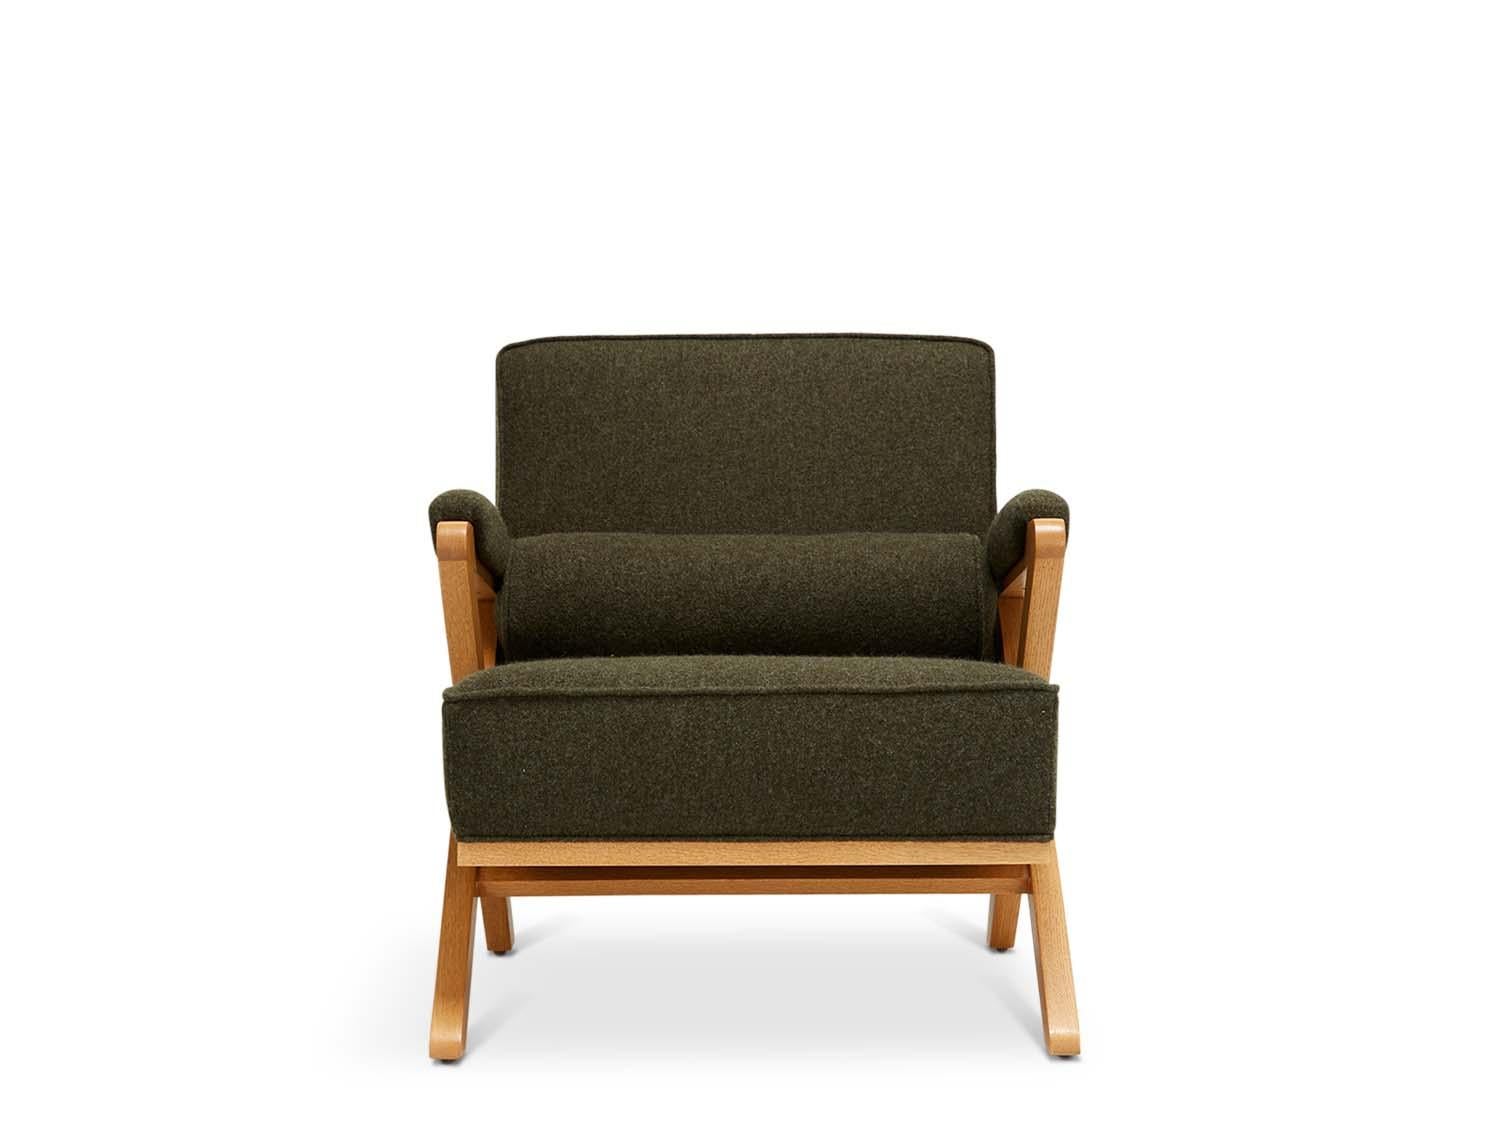 The Dillon chair has a solid American walnut or white oak x-based frame that features boxed cushions with piping and buttons on the back cushion. 

 